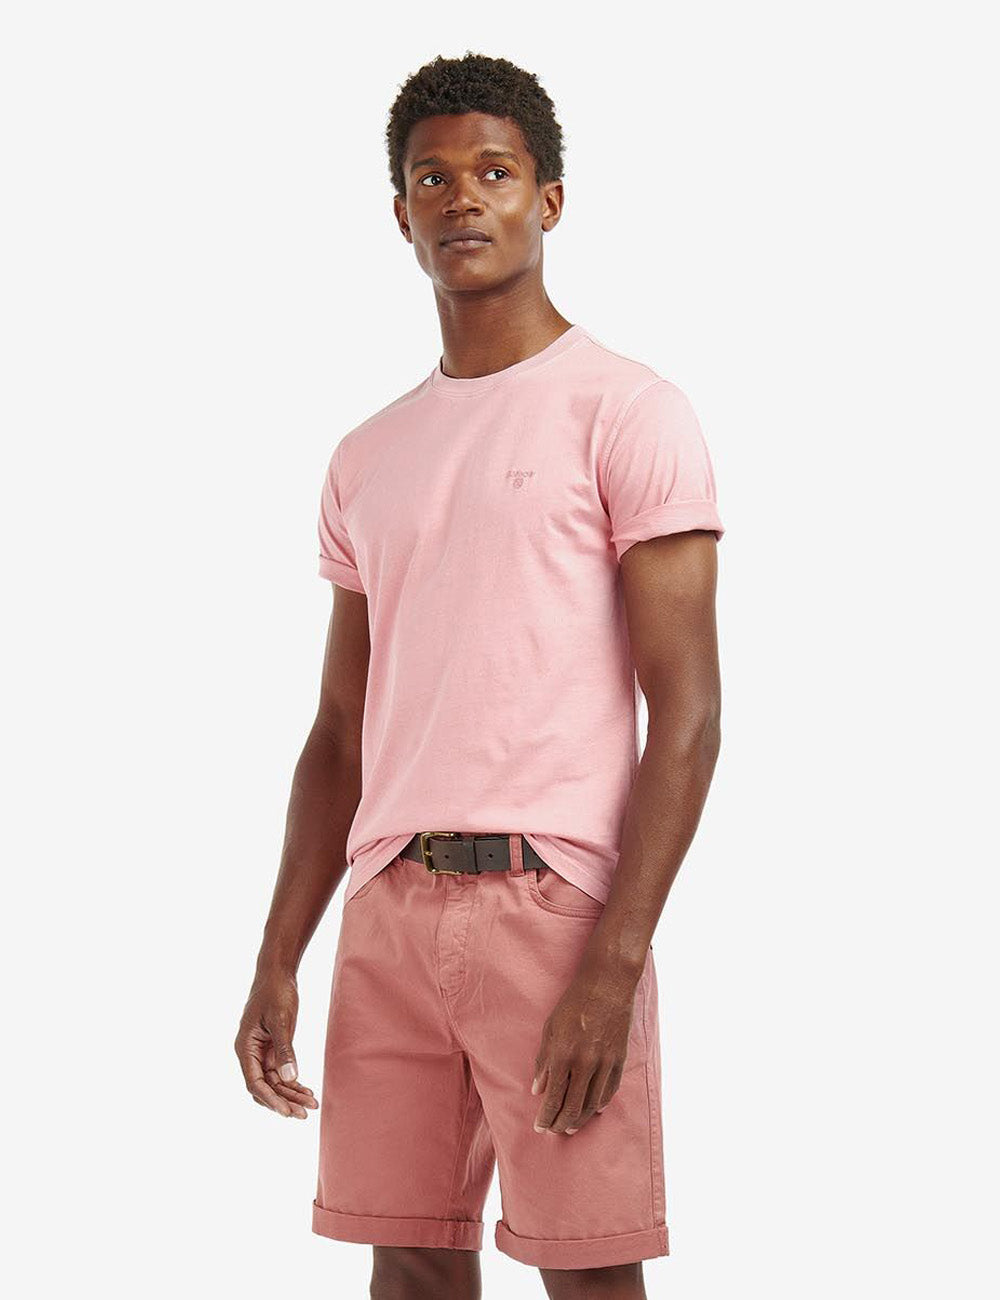 Man wearing the Barbour Garment Dyed T-shirt in Pink Salt